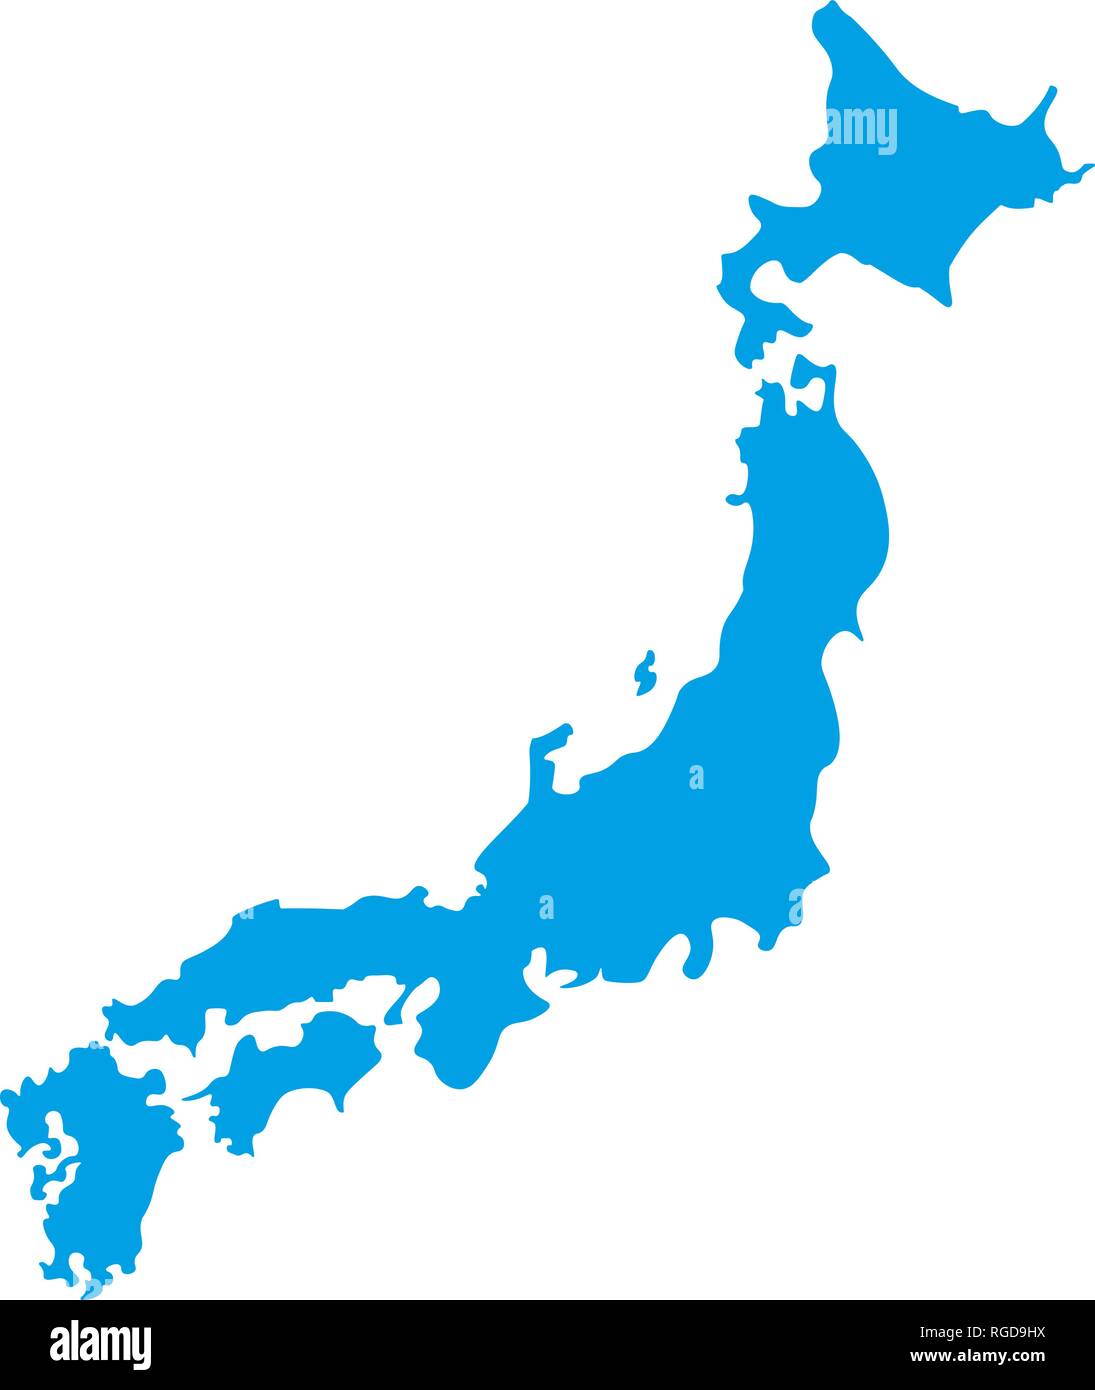 Map of Japan - outline. Silhouette of Japan map vector illustration Stock Vector